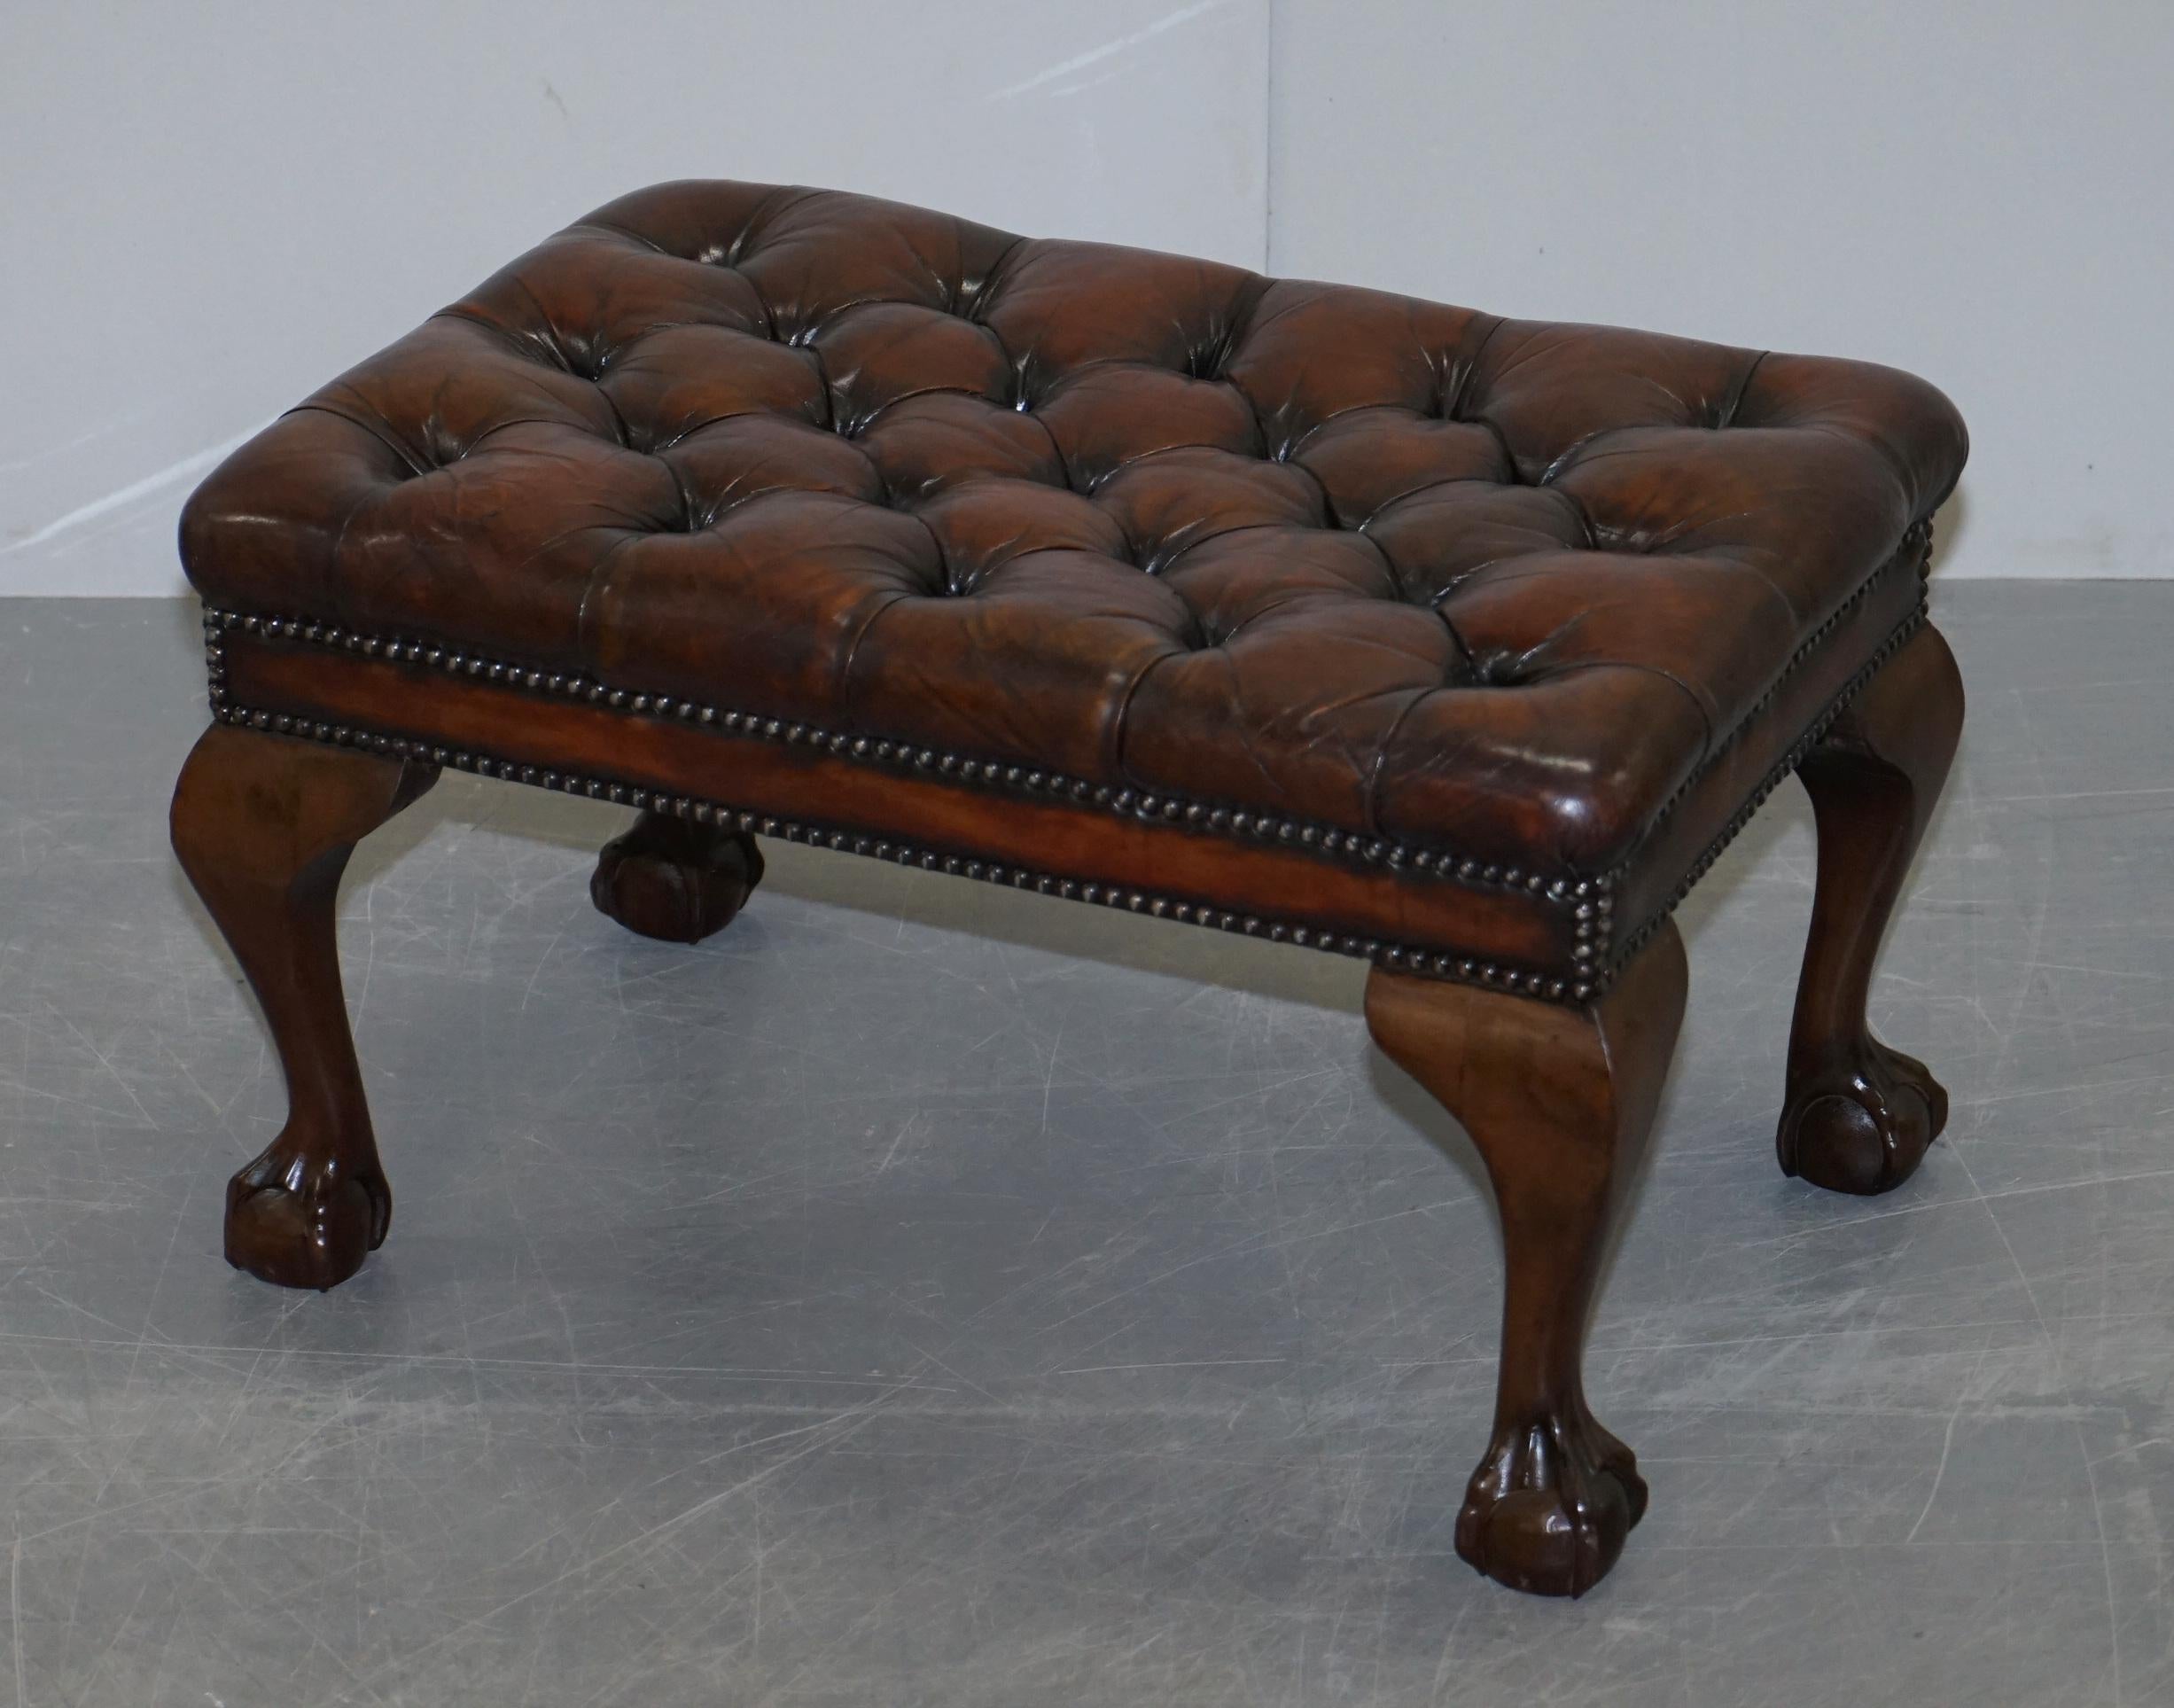 We are delighted to offer for sale this stunning pair of fully restored hand dyed brown leather Chesterfield footstools

A good looking and well made pair of fully restored hand dyed cigar brown leather Chesterfield tufted footstools. The legs are